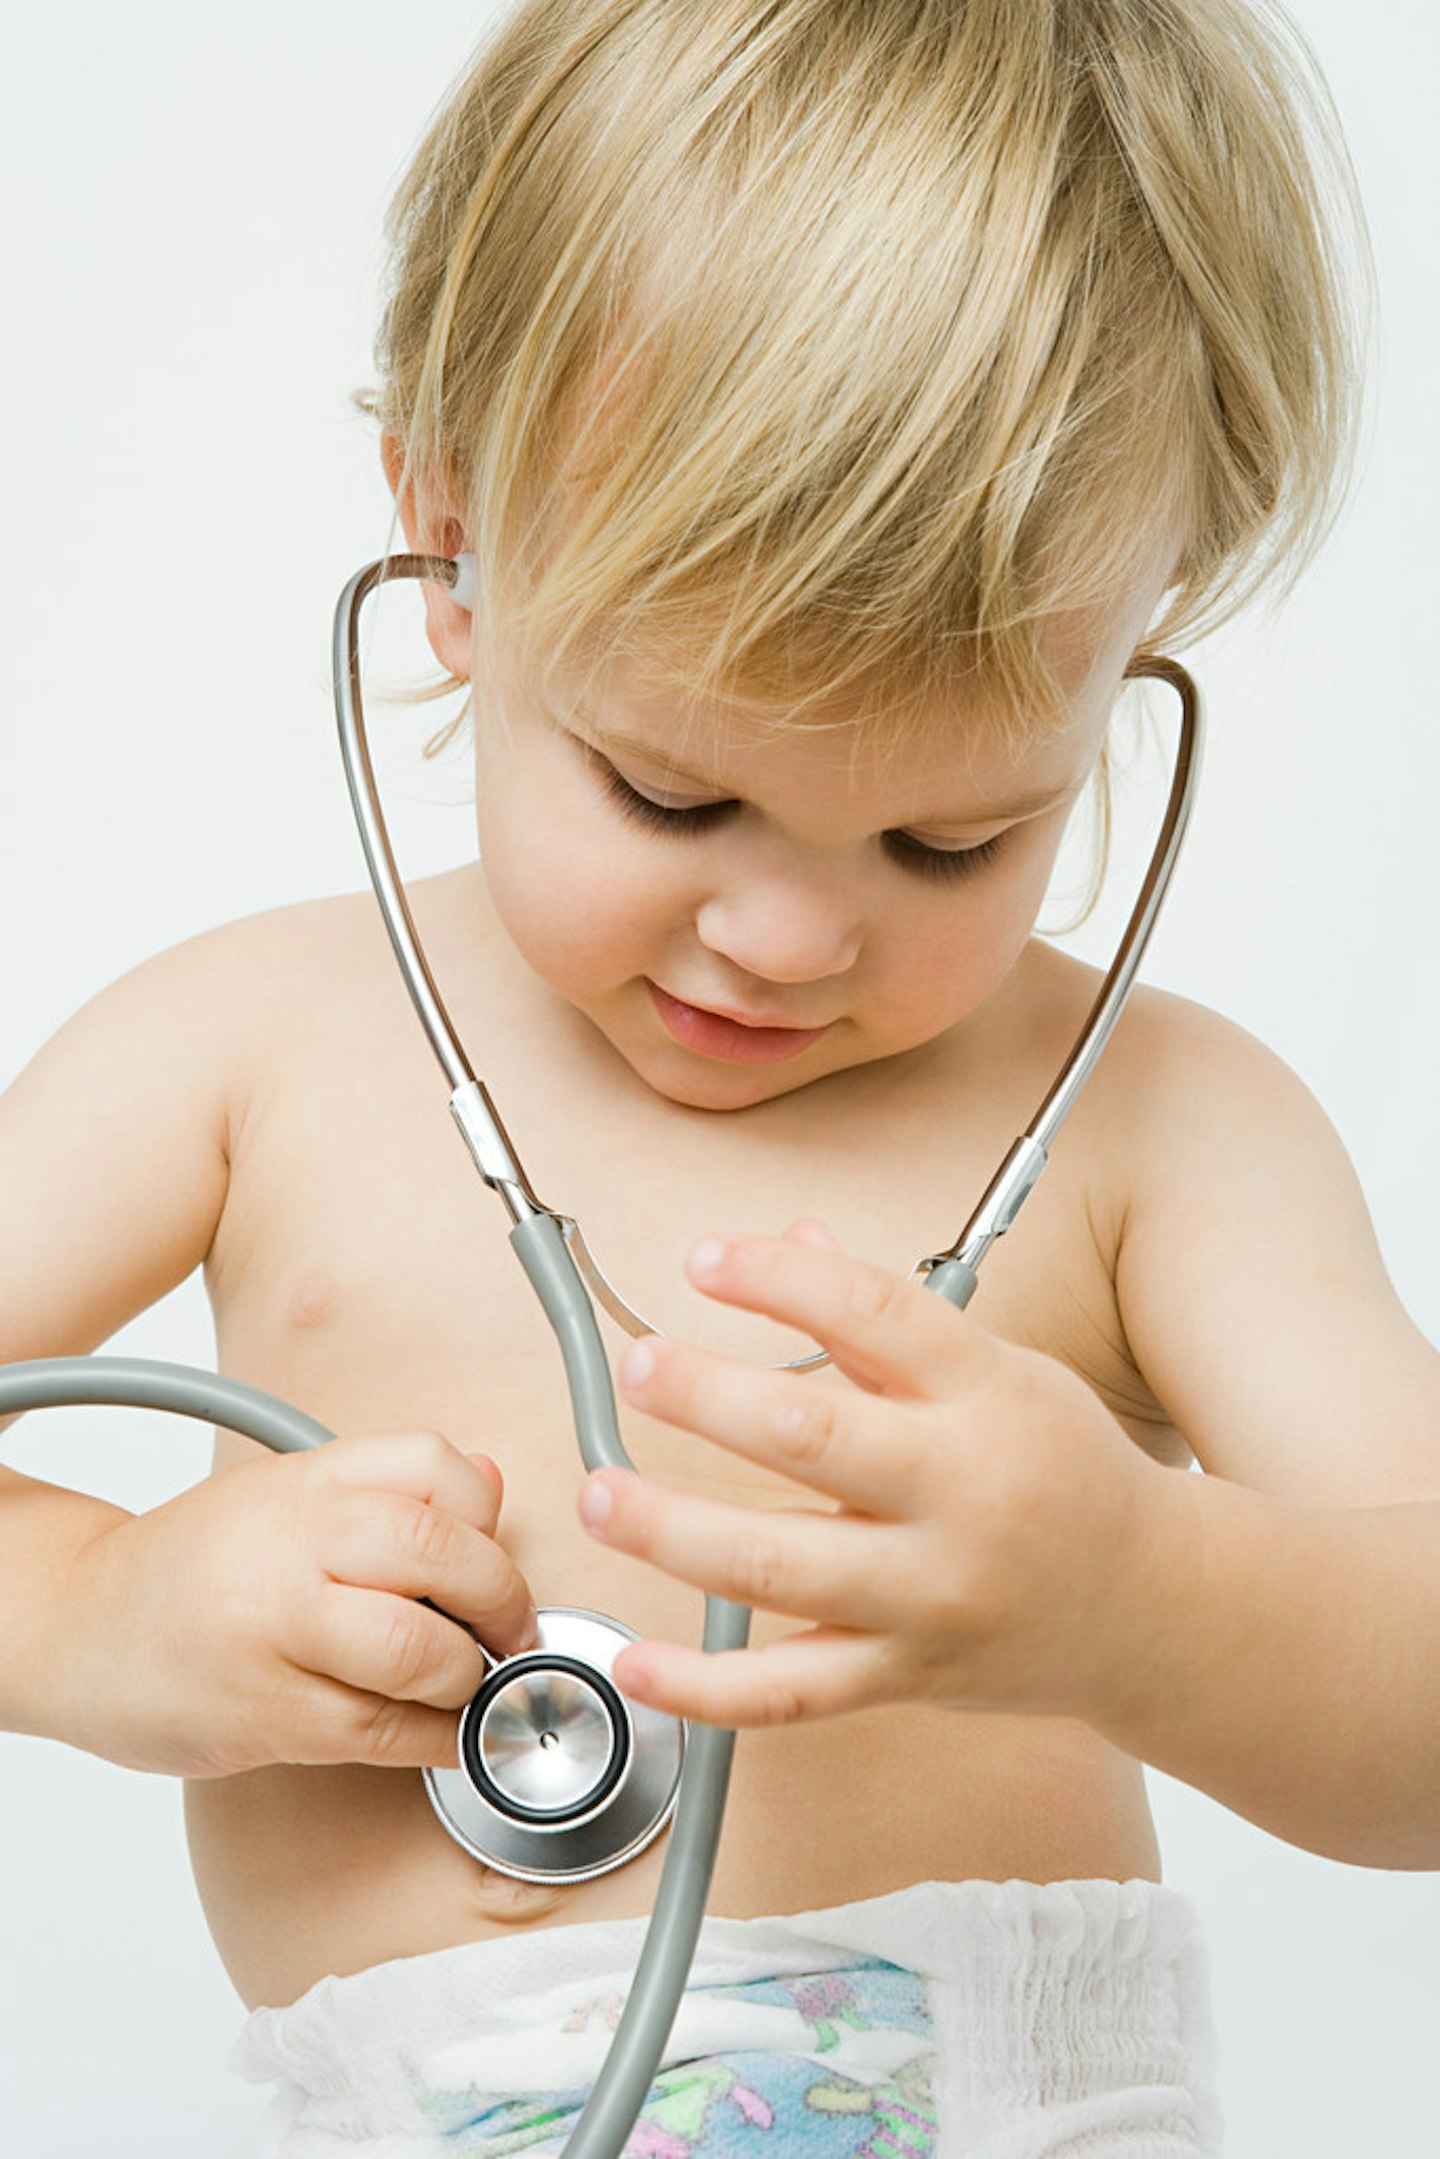 Toddler chest infections - symptoms and treatments